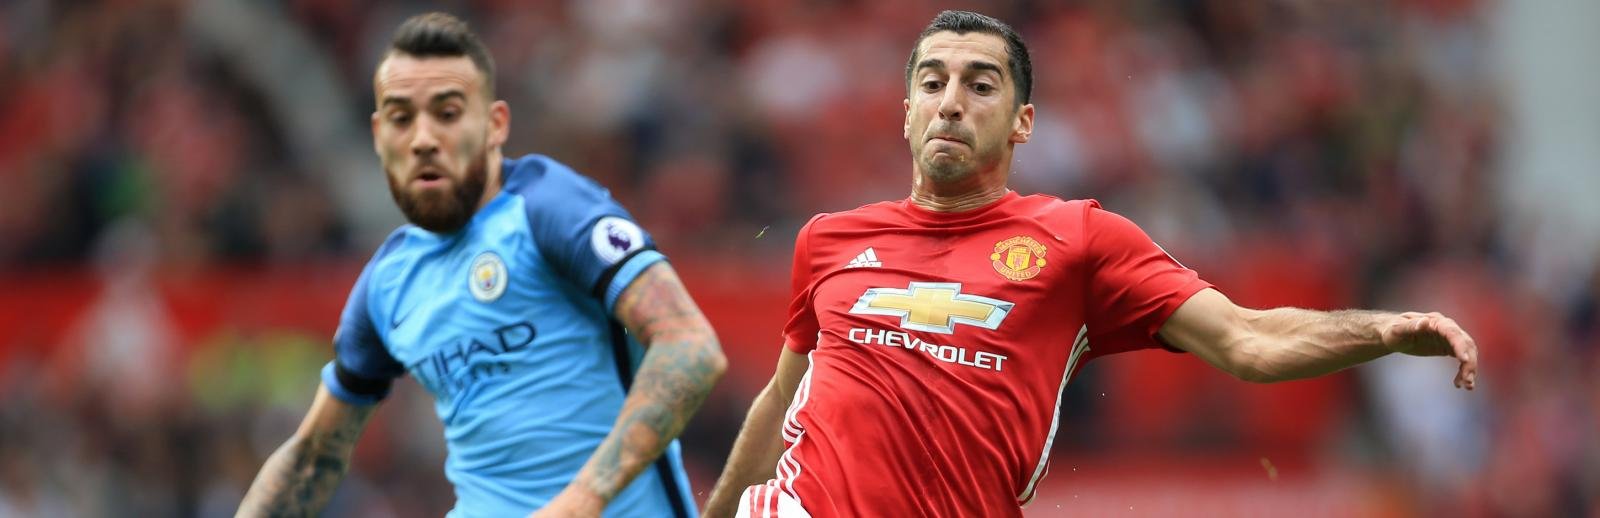 Premier League Round-Up: Manchester City defeat Manchester United to preserve 100% record